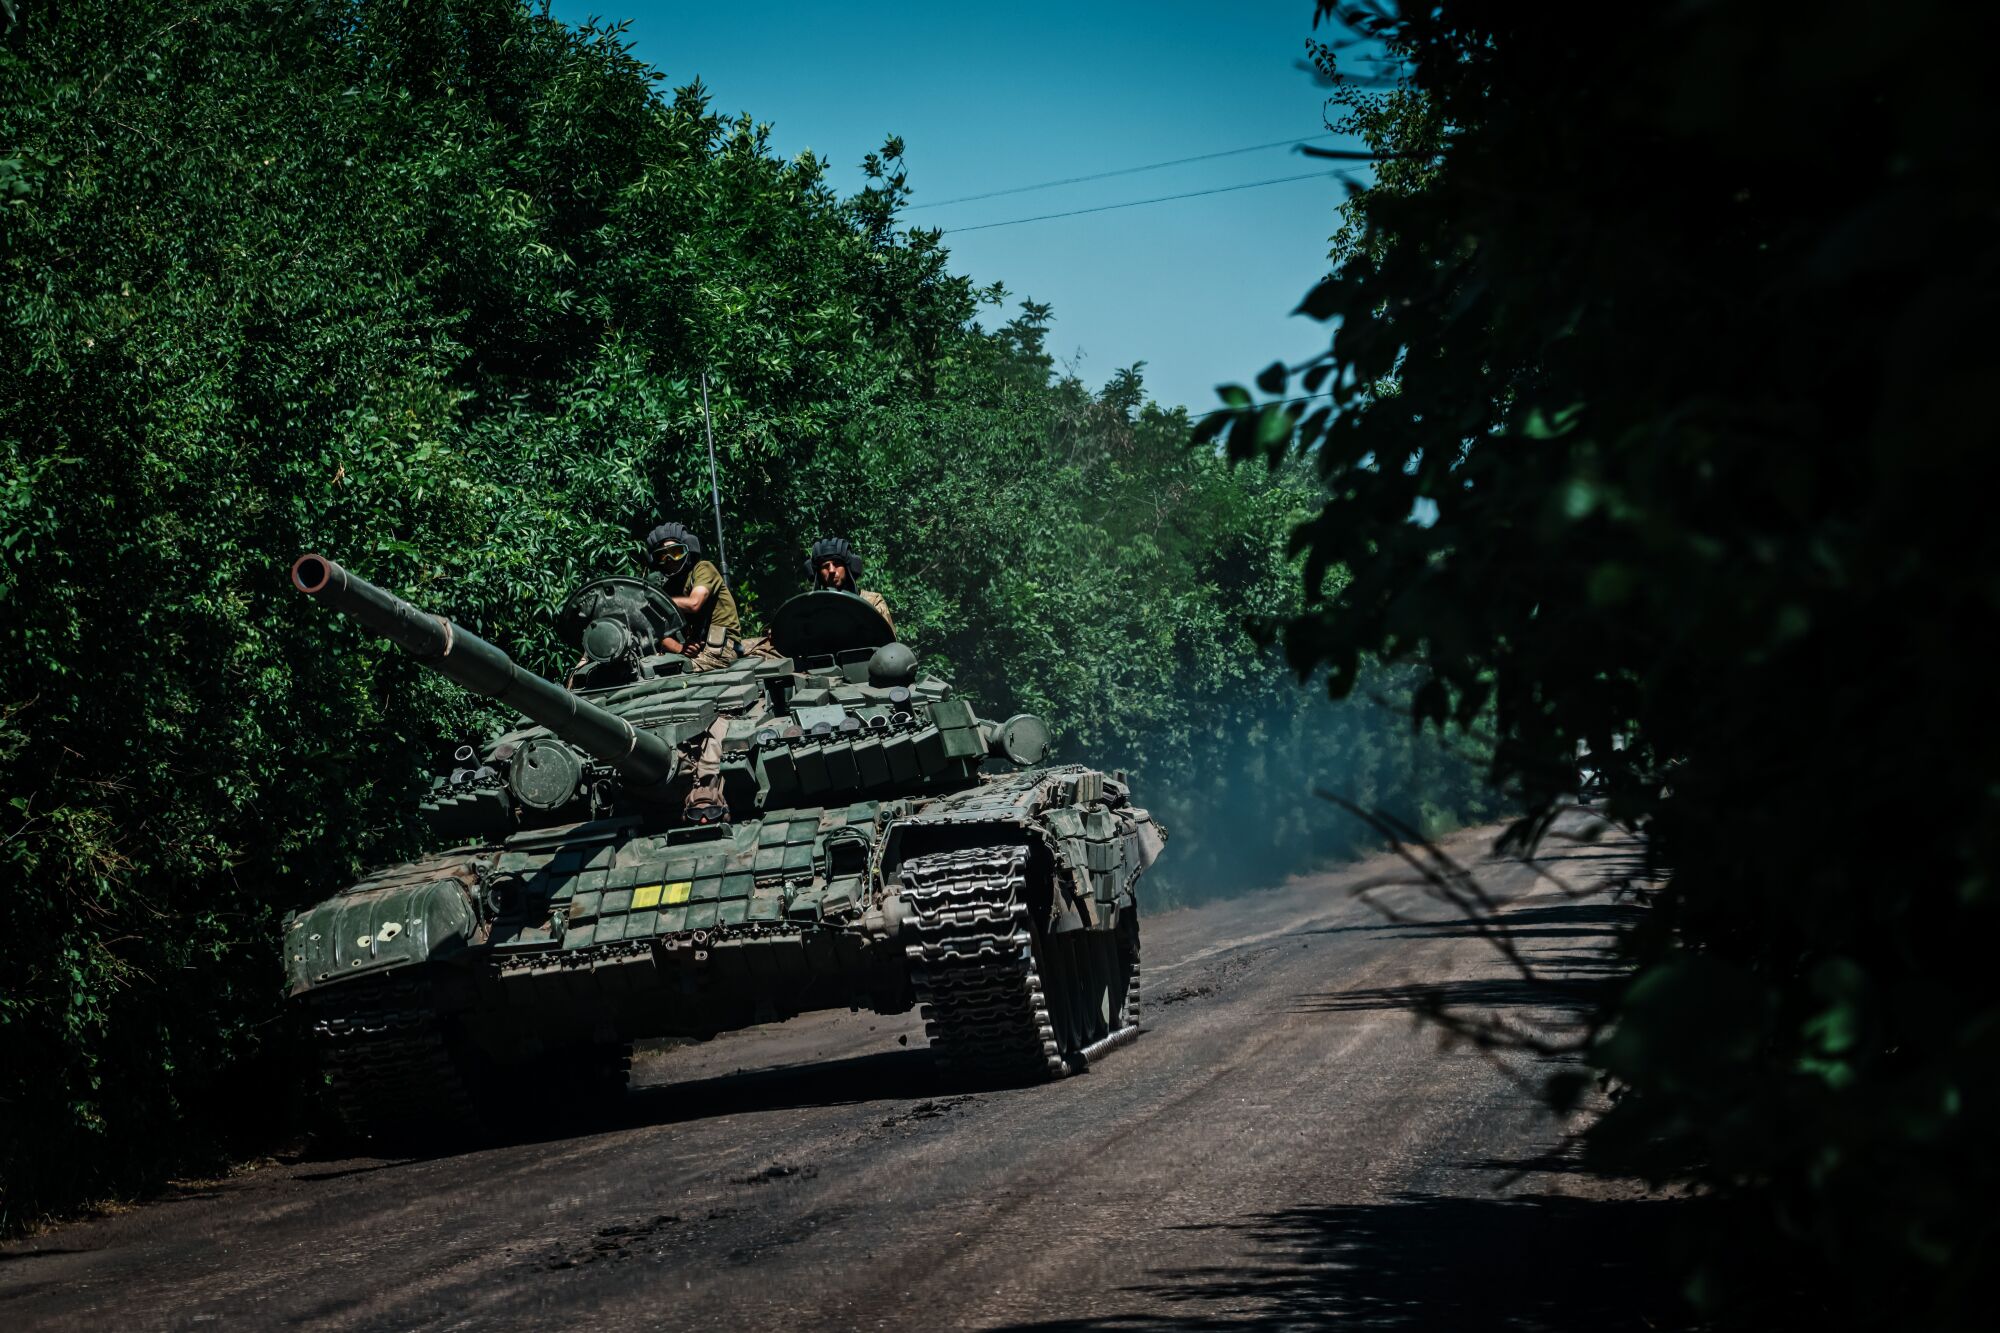 Two people in fatigues atop a tank on a road, along a dense row of green trees